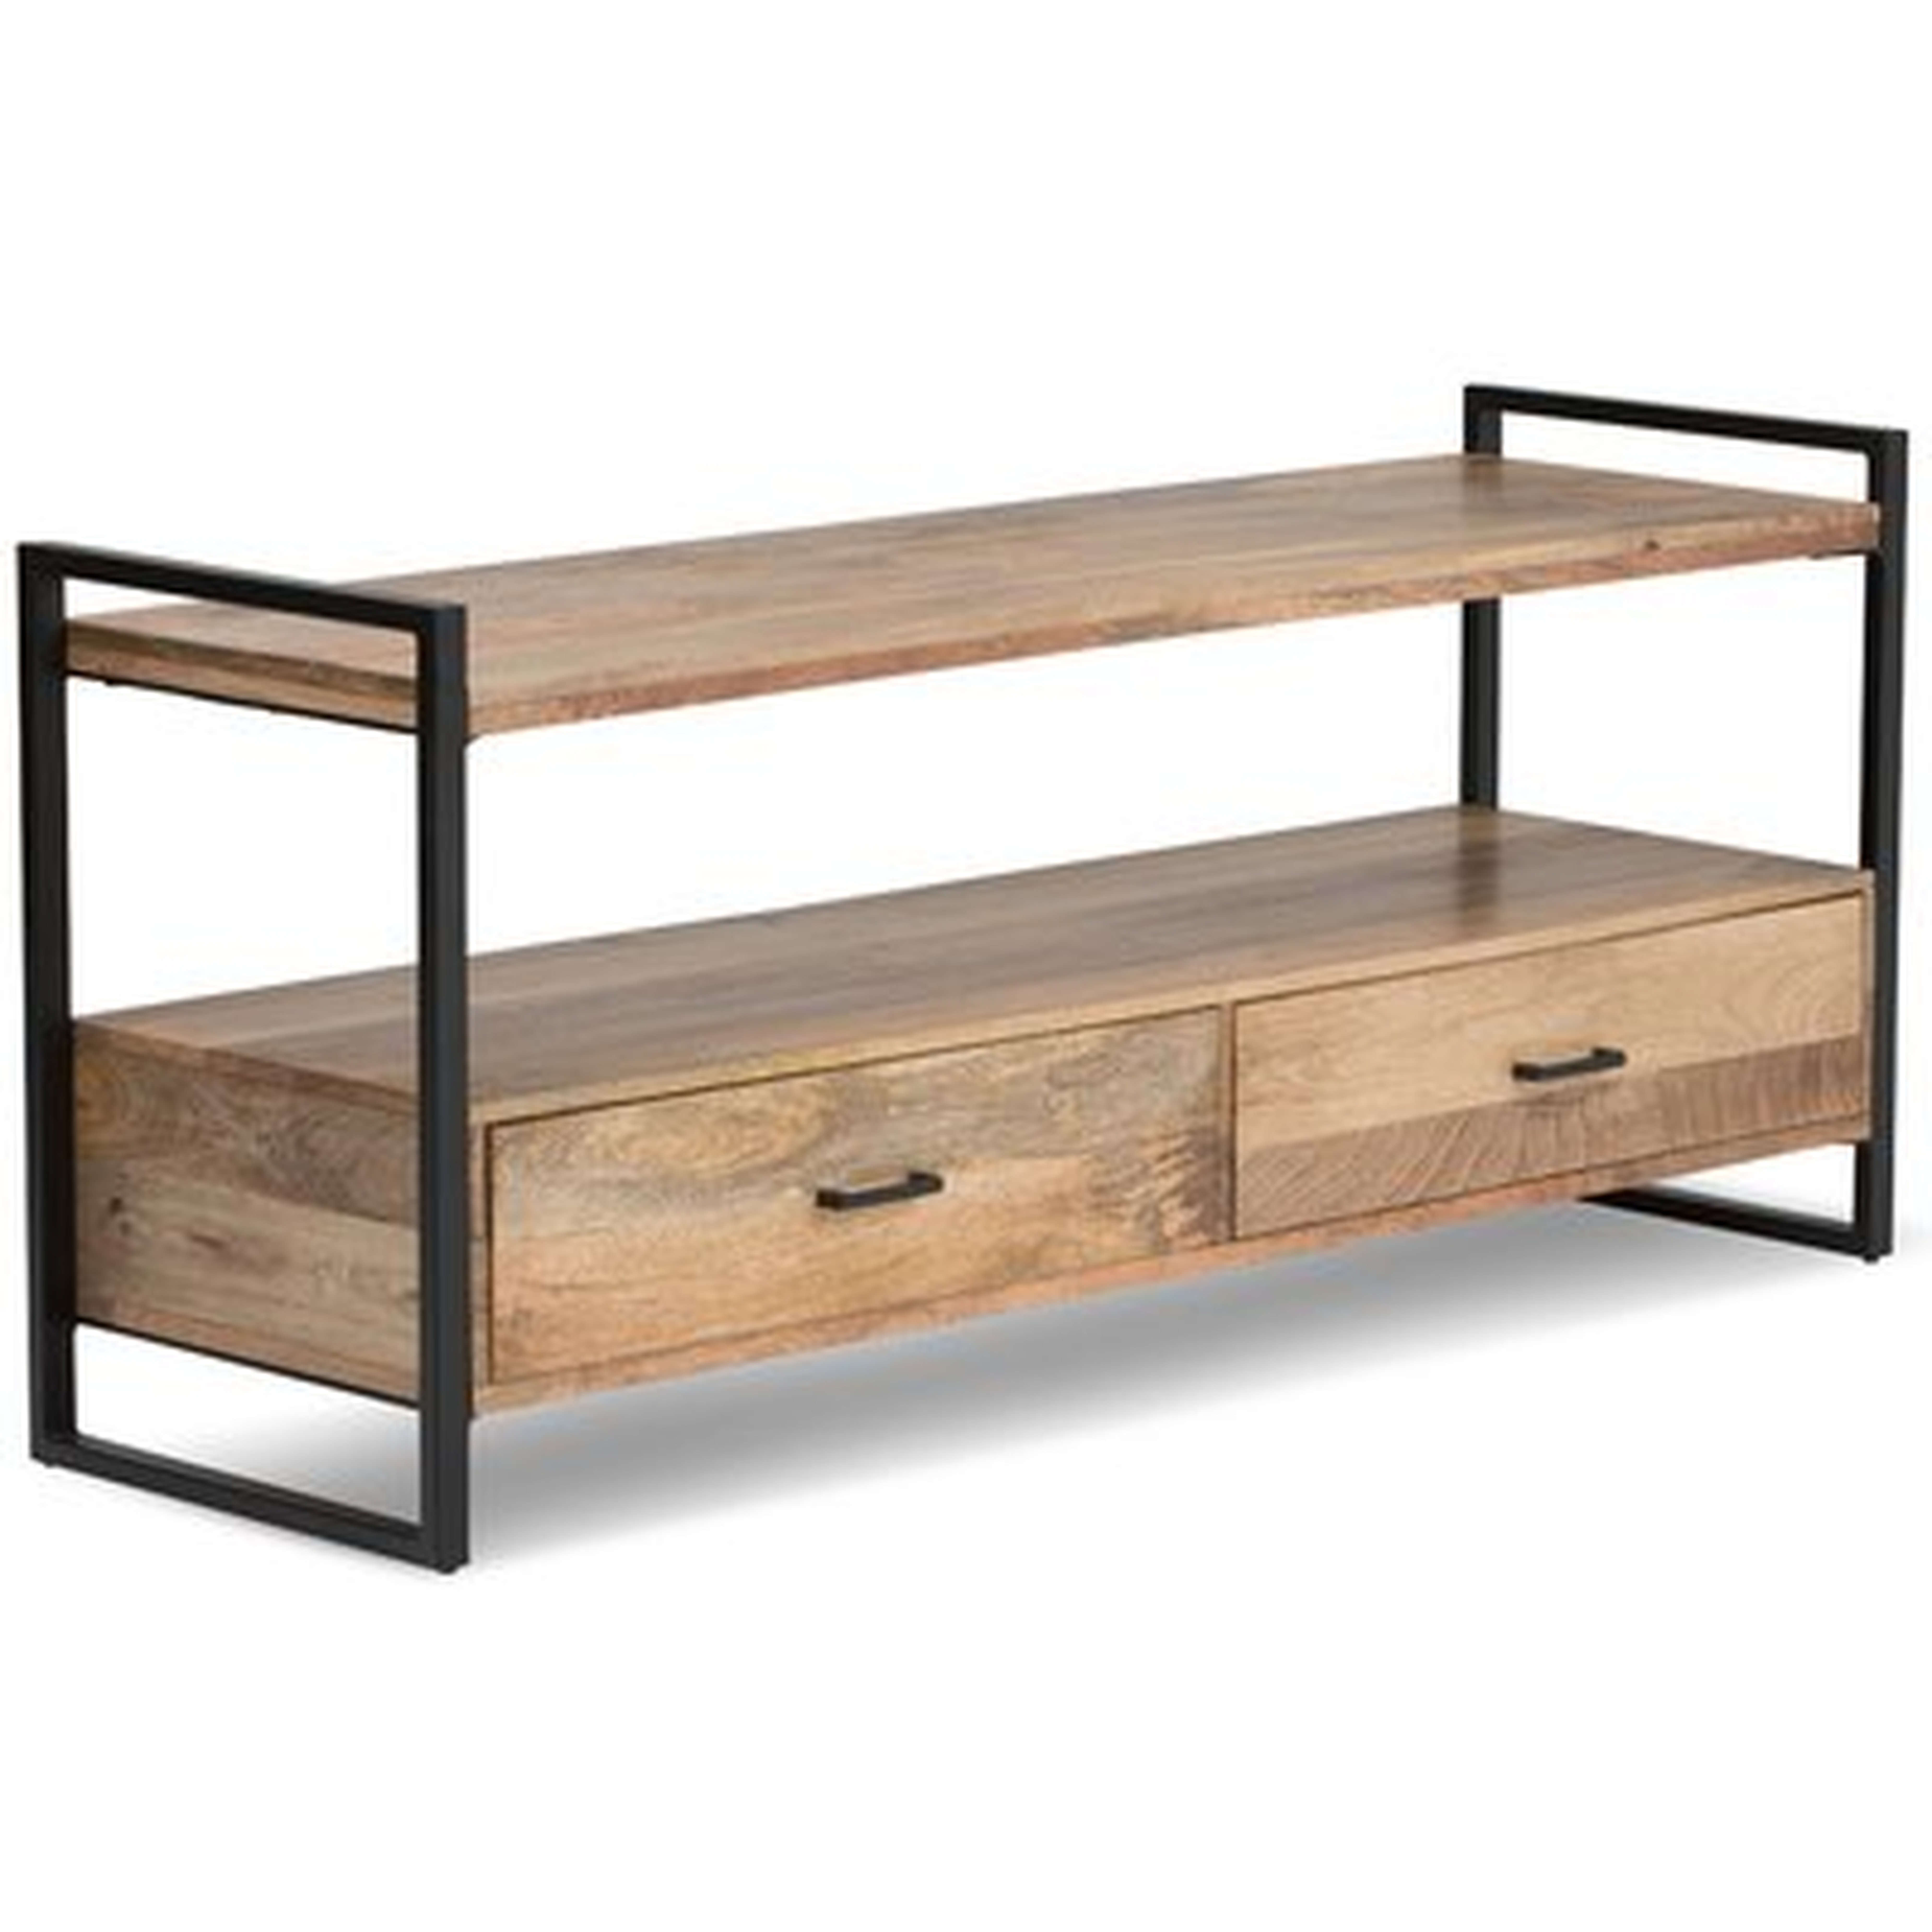 Sturdevant Solid Wood TV Stand for TVs up to 70 inches - AllModern